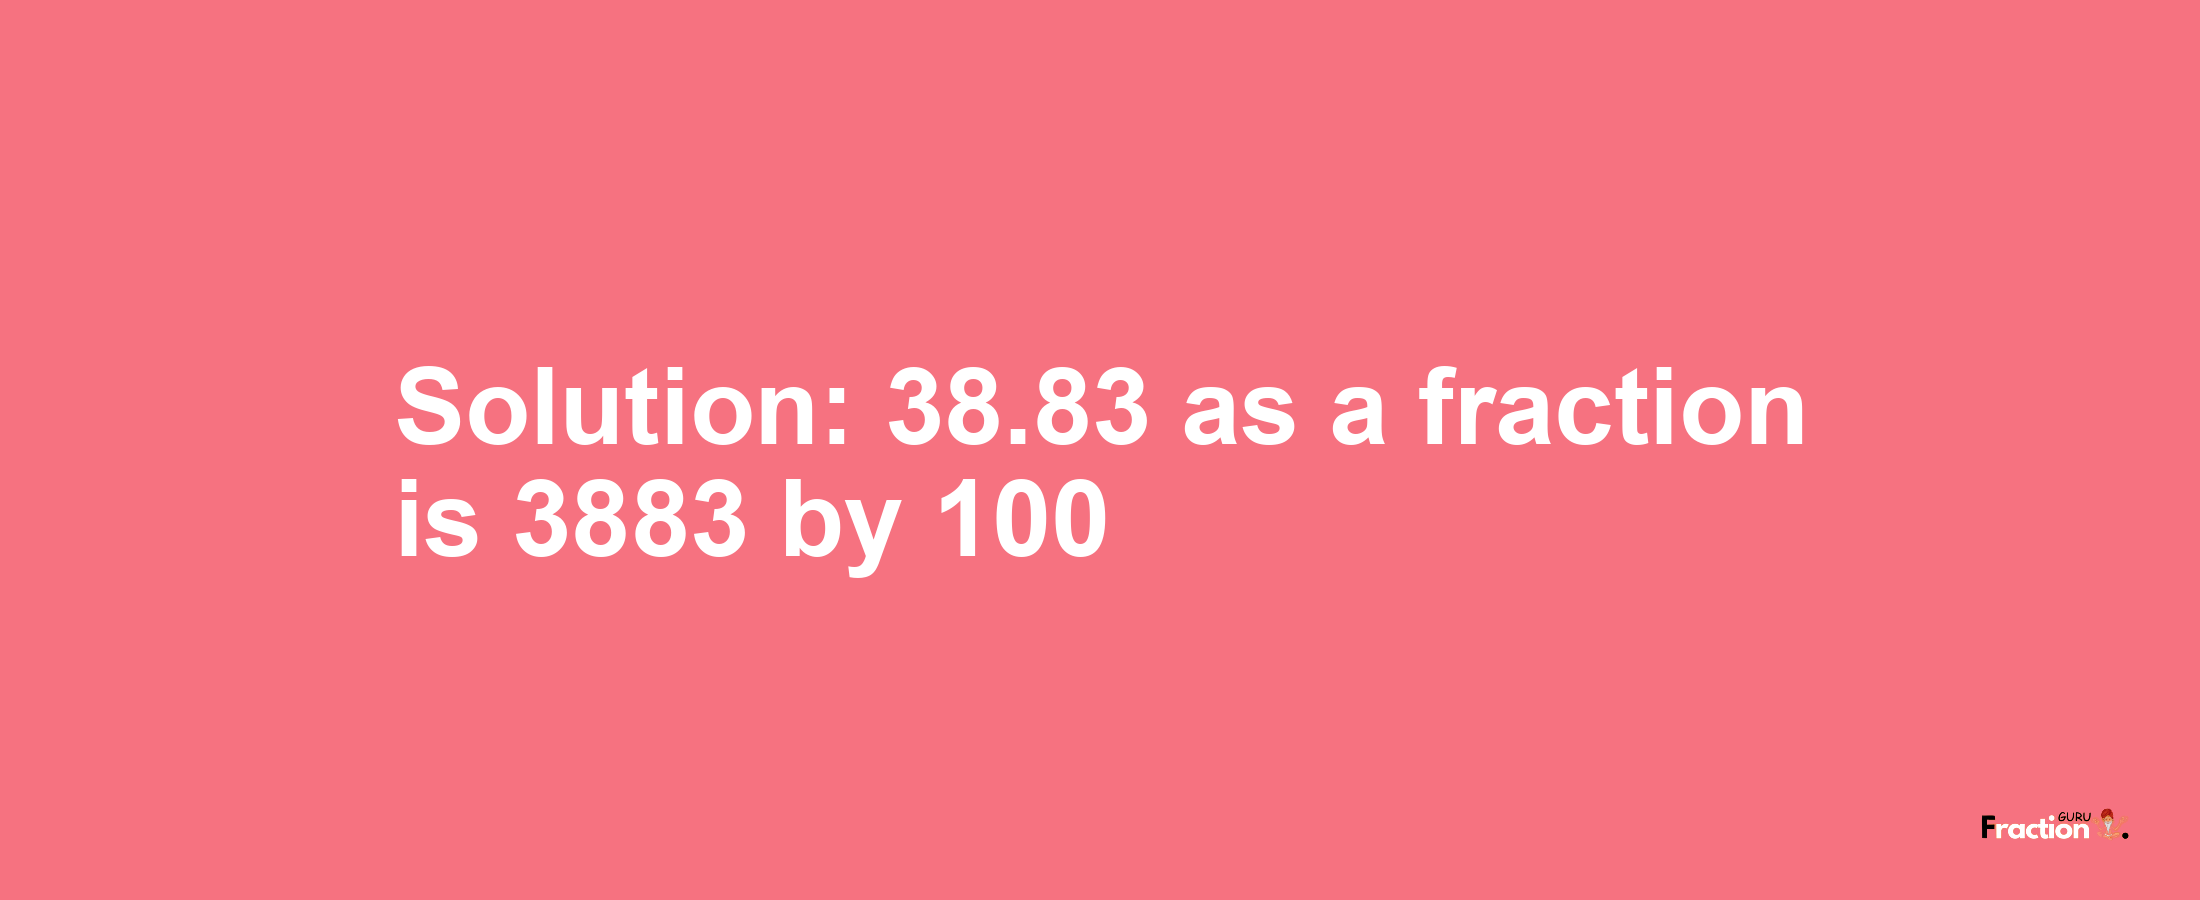 Solution:38.83 as a fraction is 3883/100